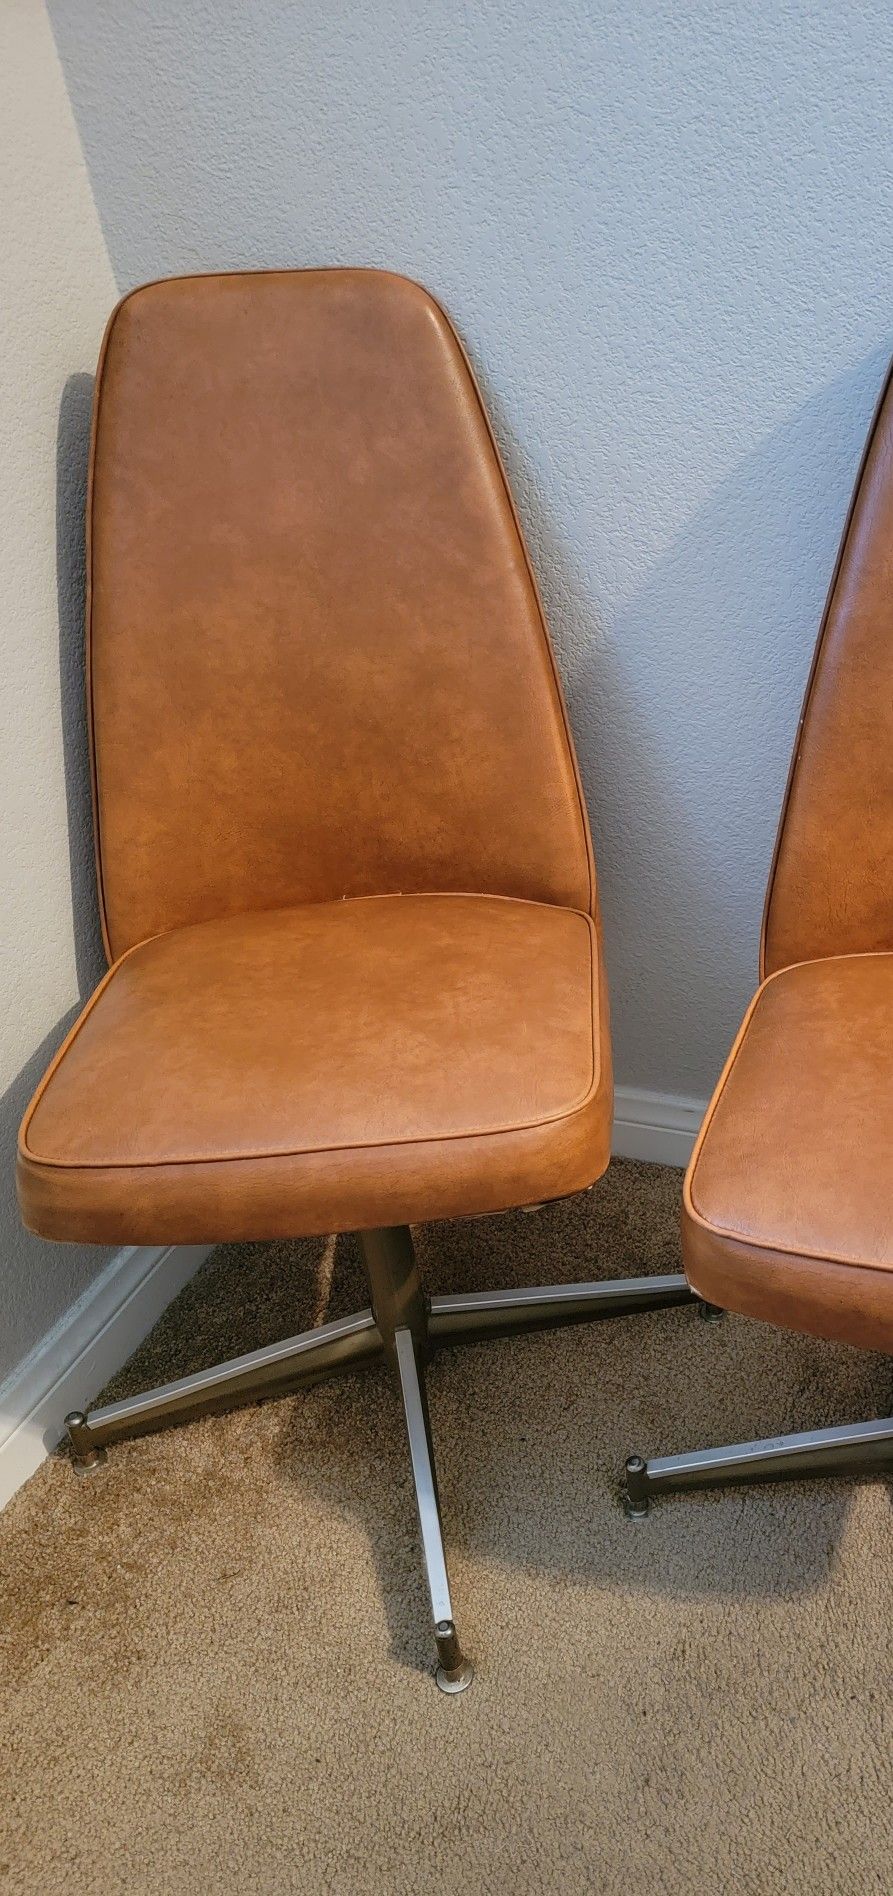 MCM Vintage Cal-style Swivel Dining Chair 2 Available Burnt Orange Great For Kitchenette RV Dinette Table